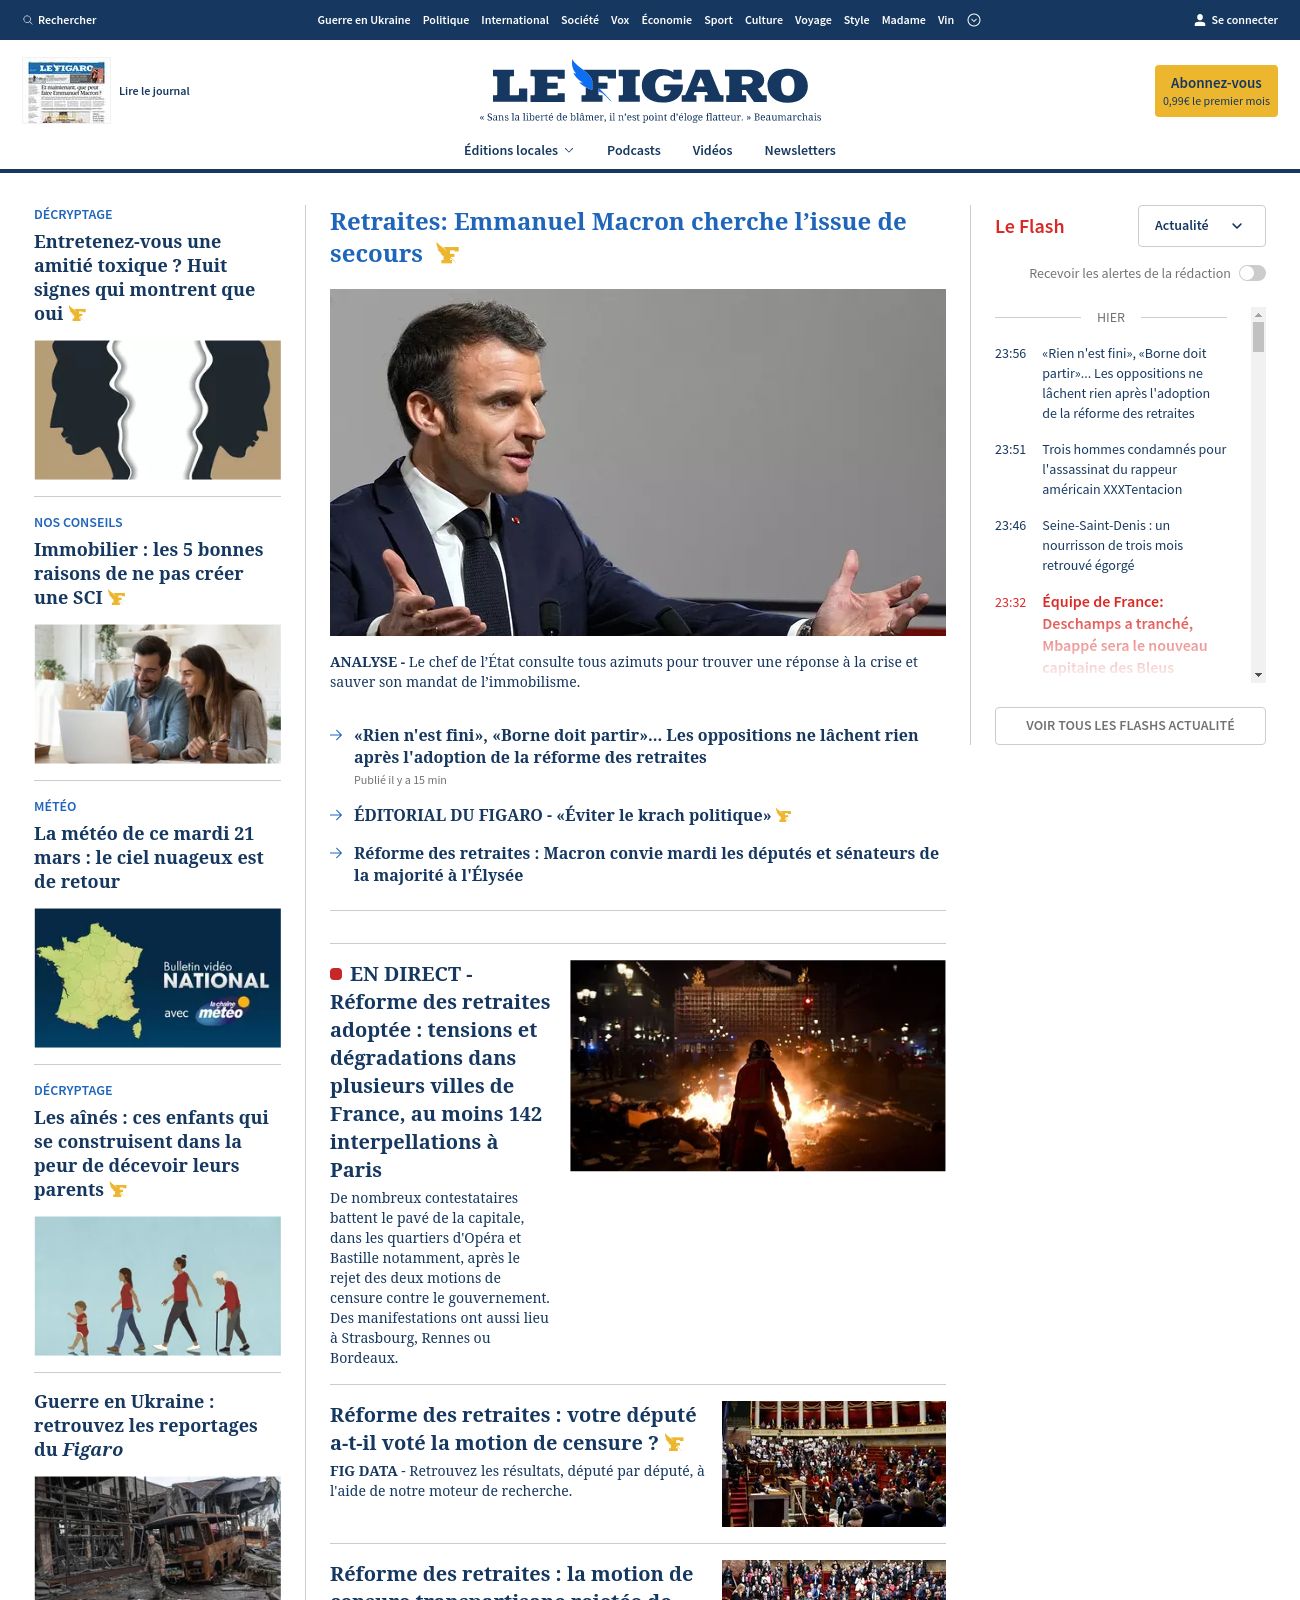 Le Figaro at 2023-03-21 00:24:57+01:00 local time